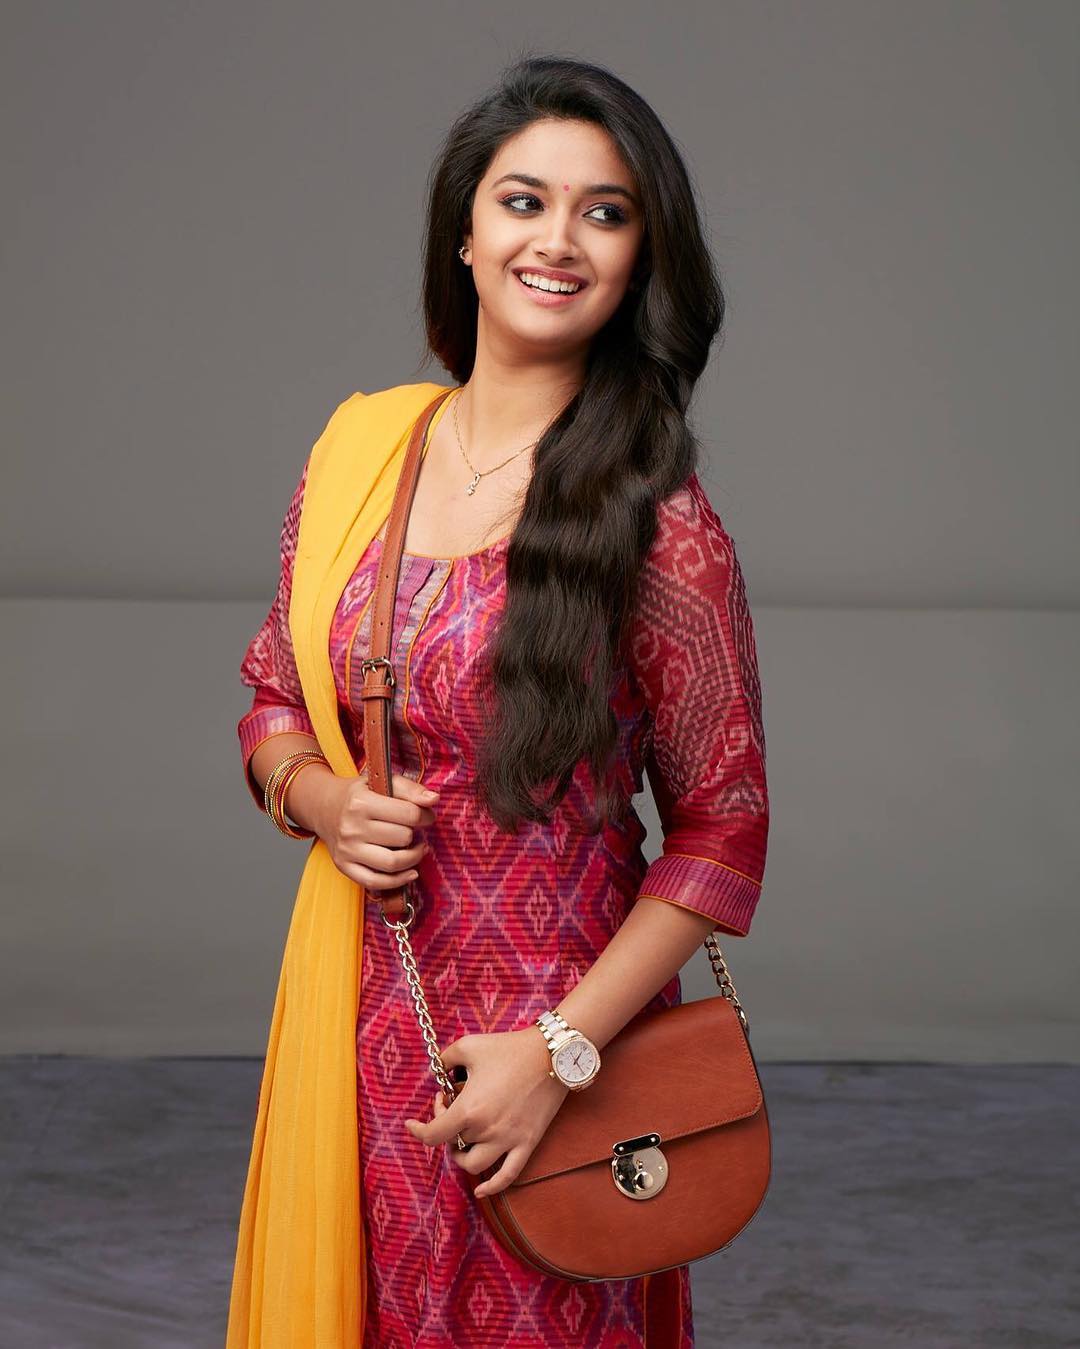 keerthy suresh wallpapwer for pc hd